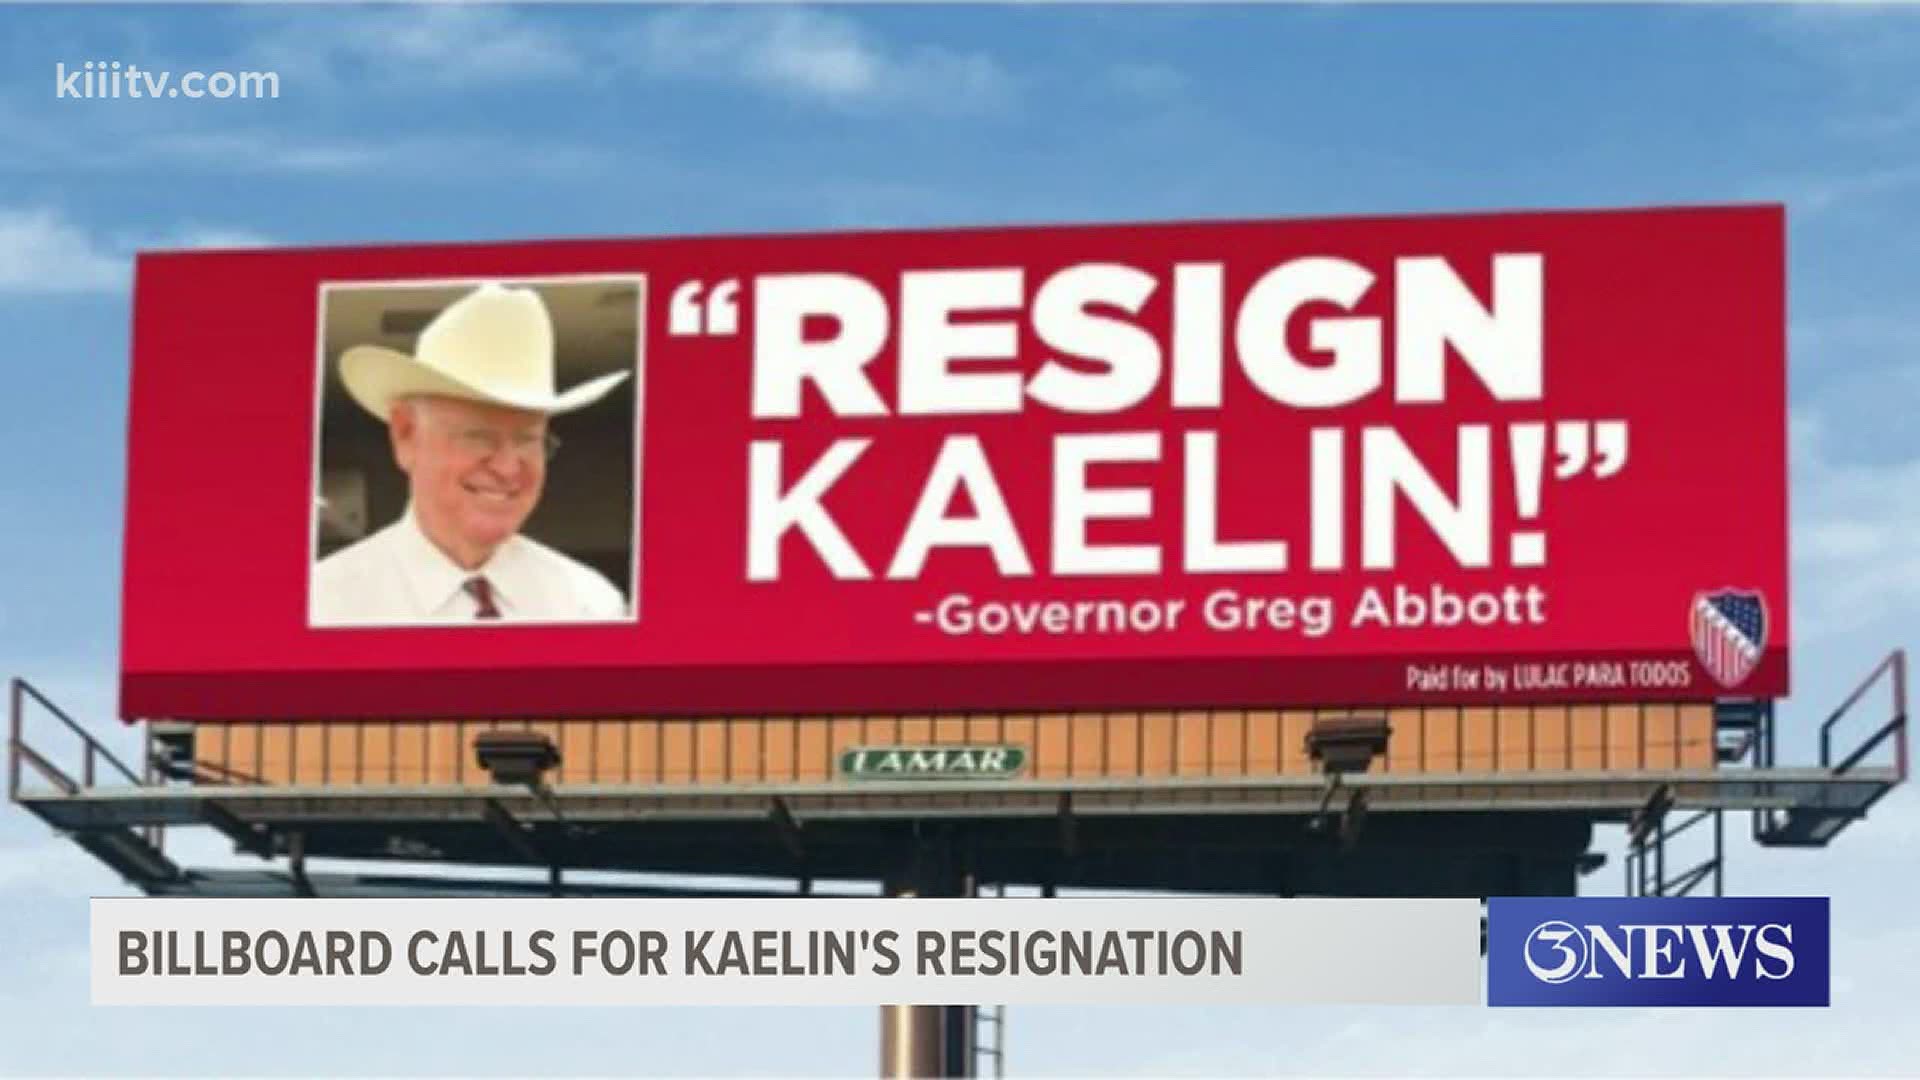 It stems from an article Kaelin reposted to Facebook suggesting George Floyd's death was a staged event by Democratic strategists to make President Trump look bad.